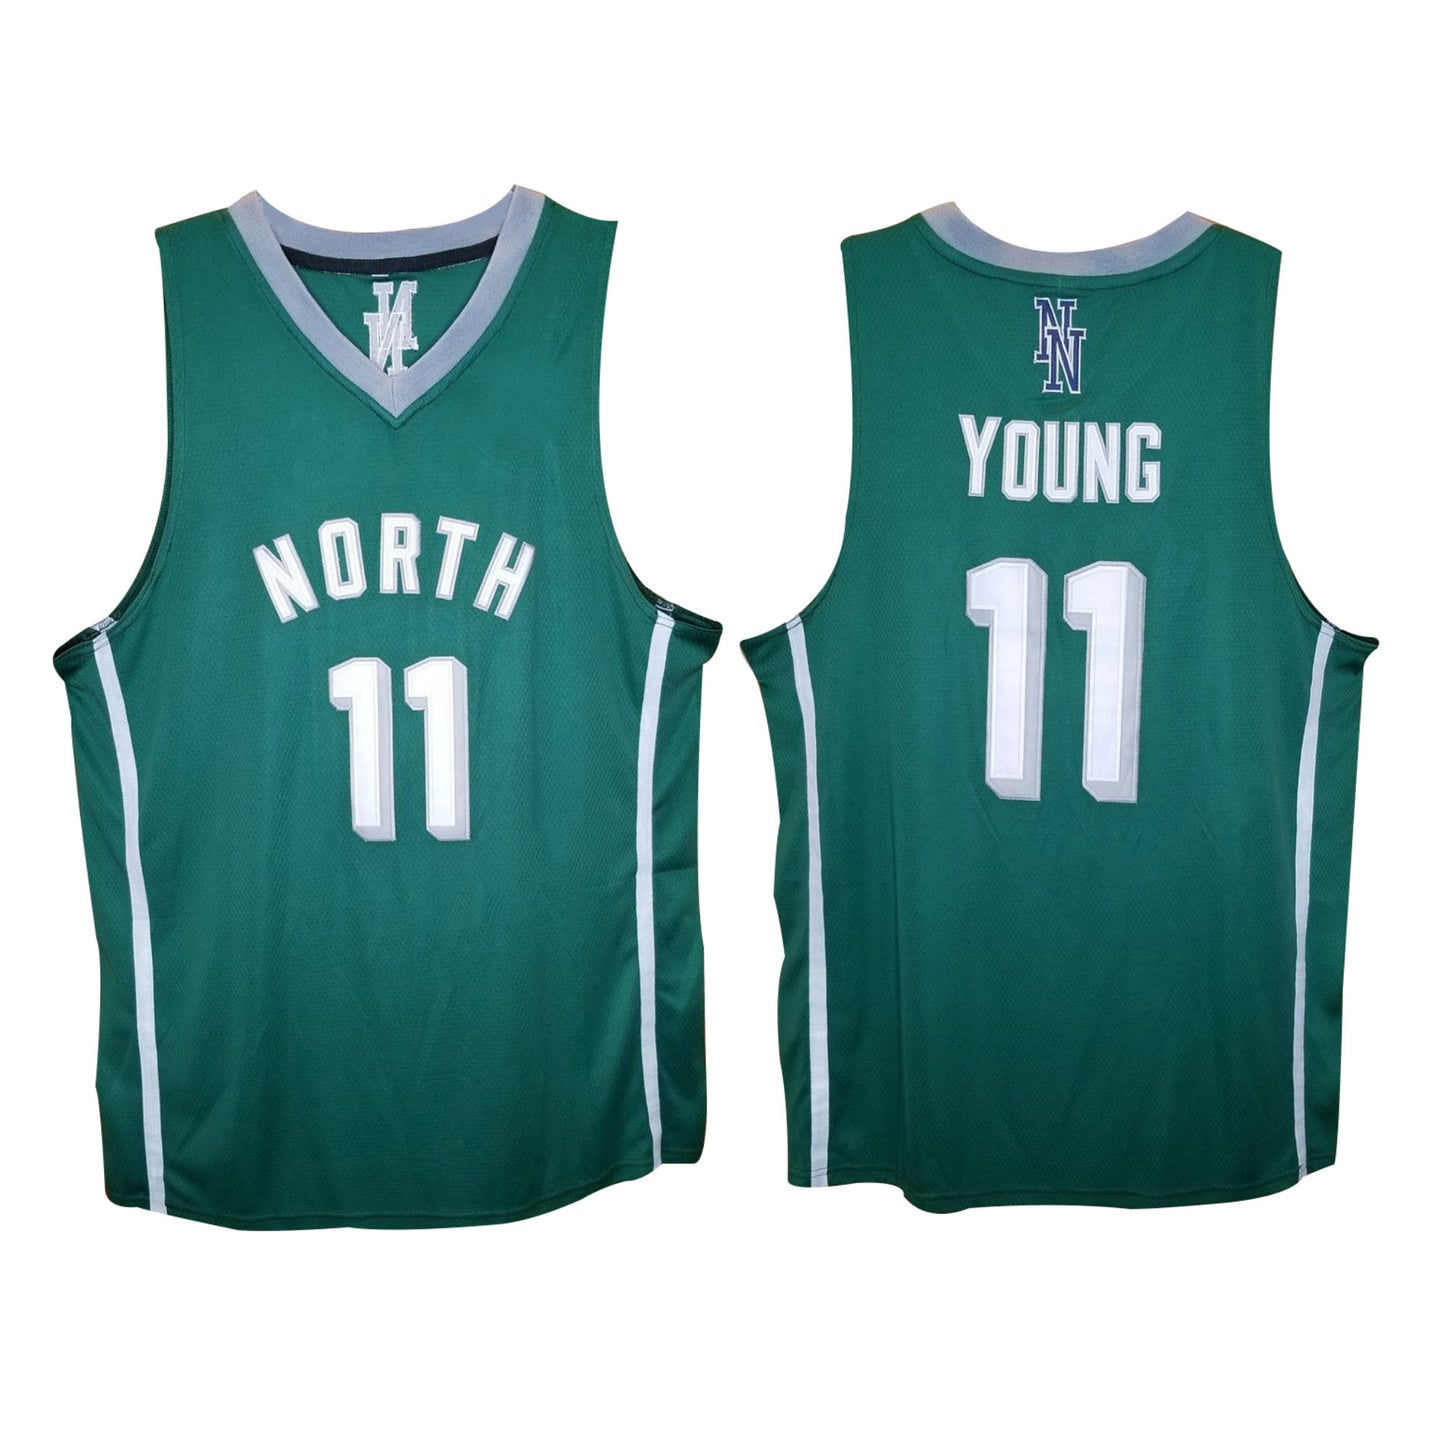 Trae Young High School 11 Basketball Jersey